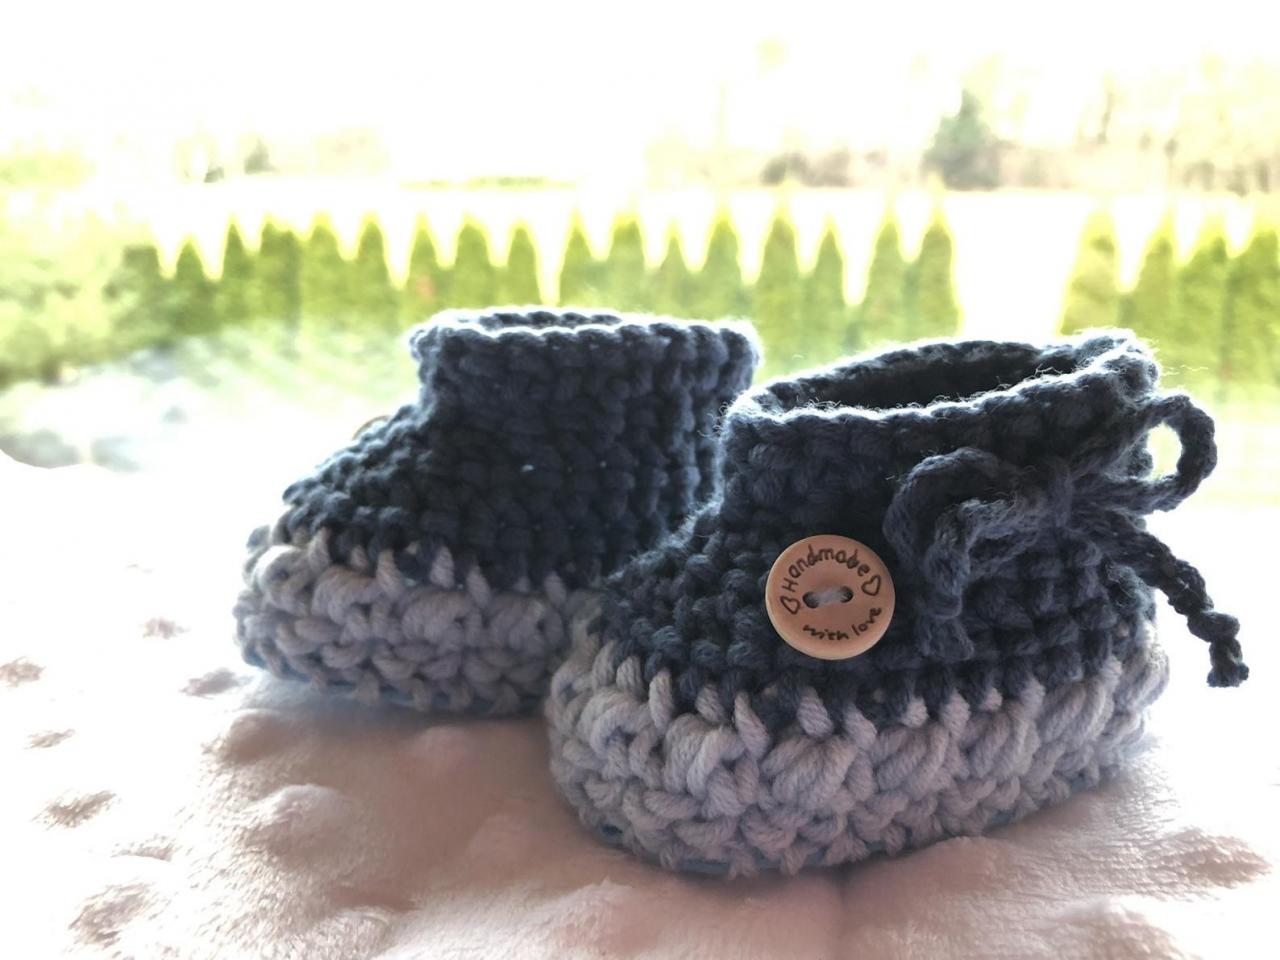 Crocheted Slippers - Cotton - Crochet - Baby Gift - Baby Boy (0-3 Months )